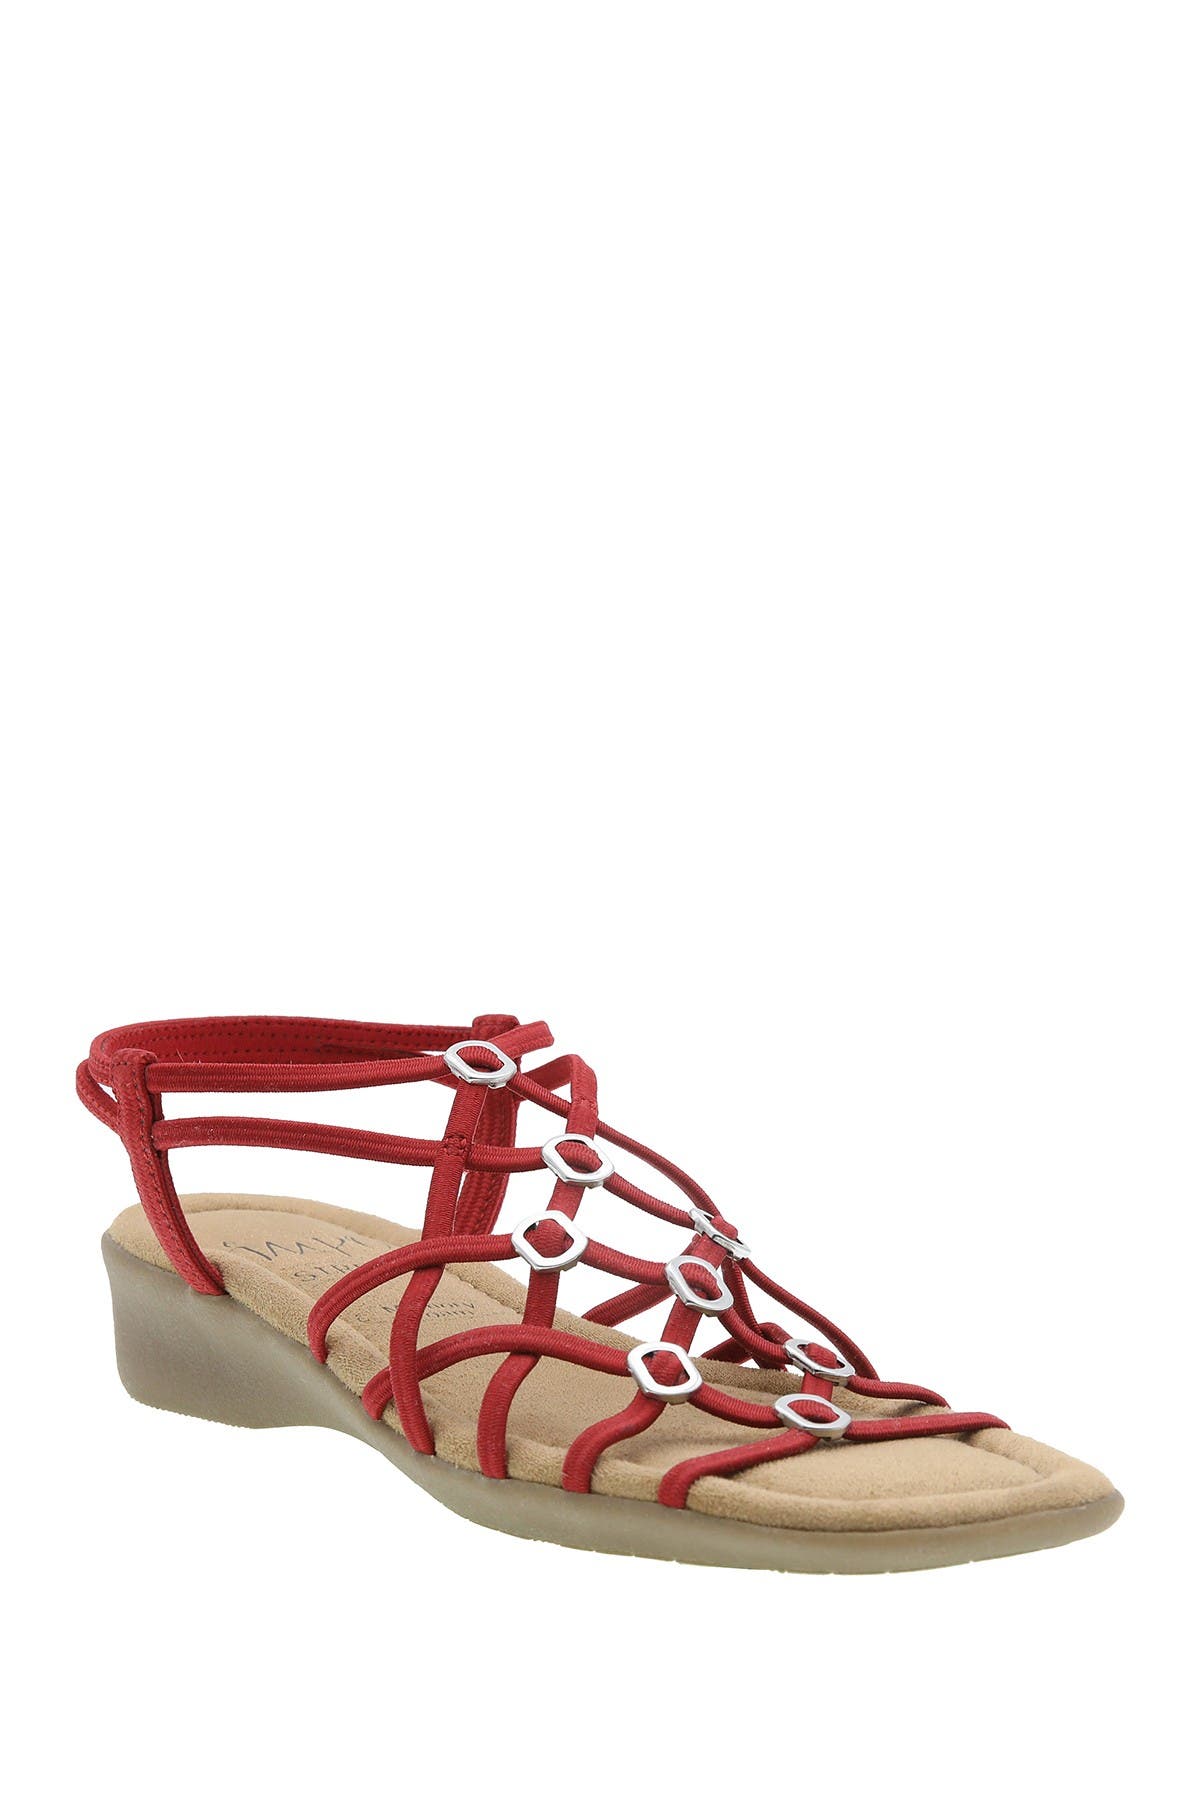 Impo Rowley Stretch Detailed Sandal In Classic Re